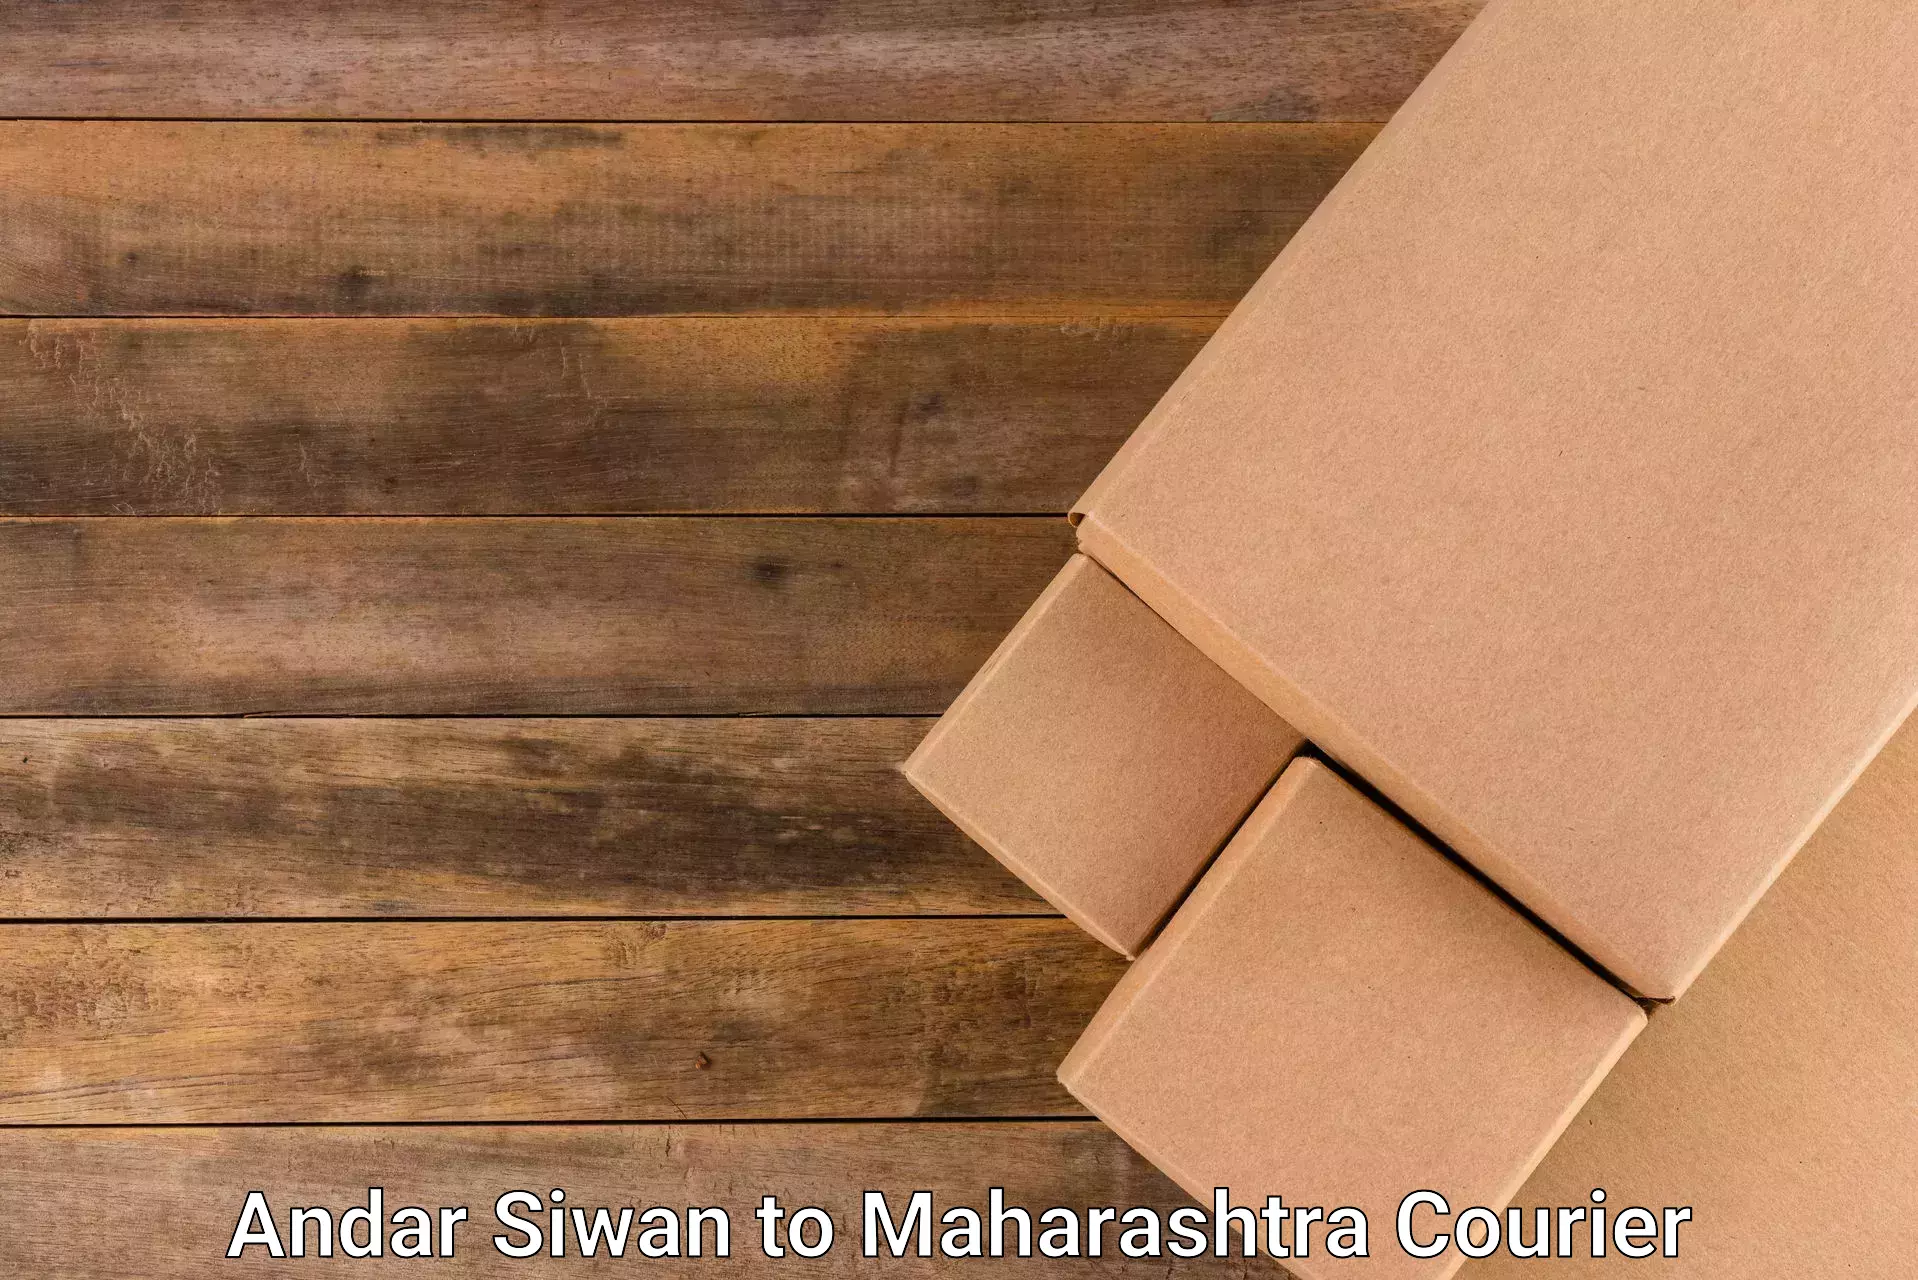 24/7 courier service Andar Siwan to Lonavala